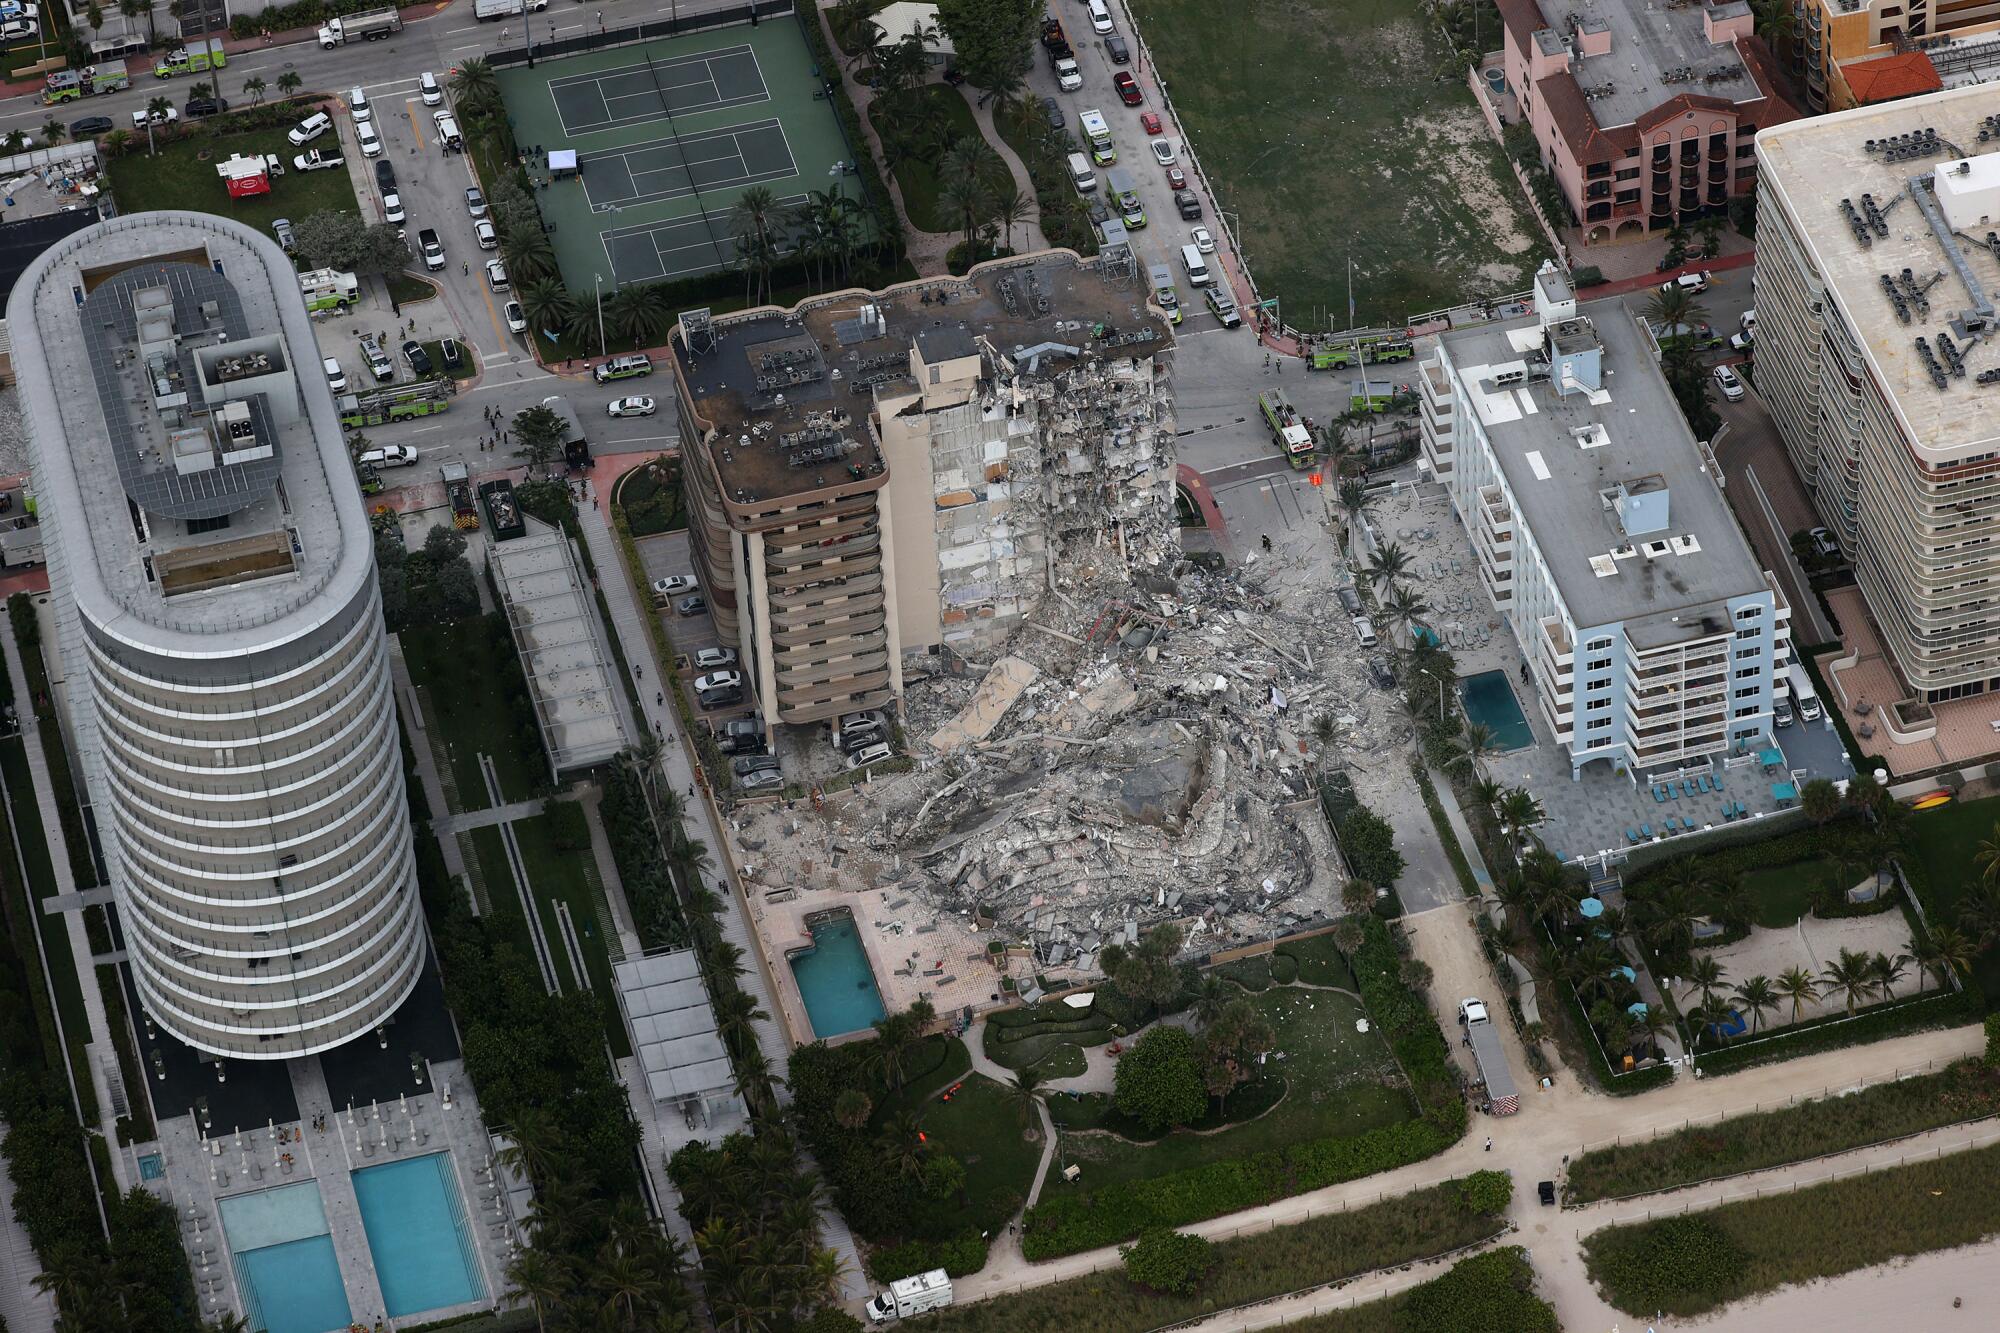 A massive pile of rubble is seen amid other beachfront buildings.